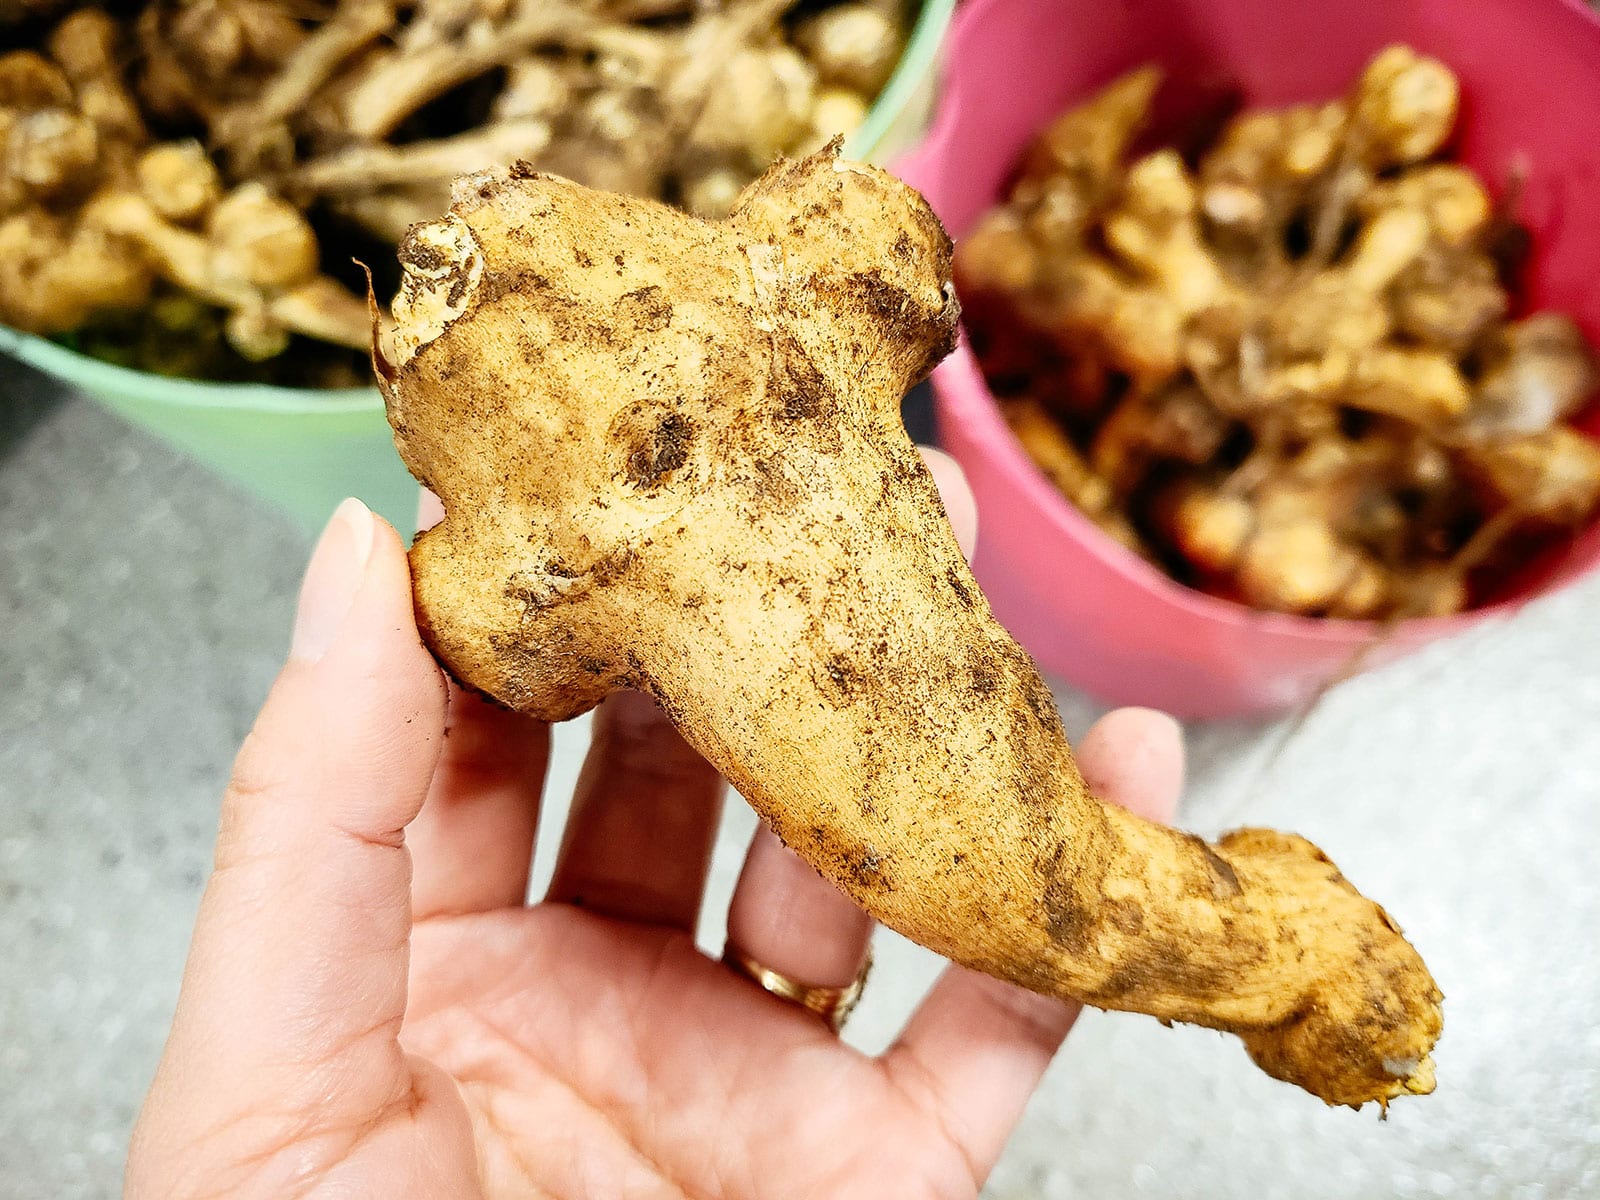 Hand holding a large Jerusalem artichoke tuber, with harvest buckets of more sunchokes in the background